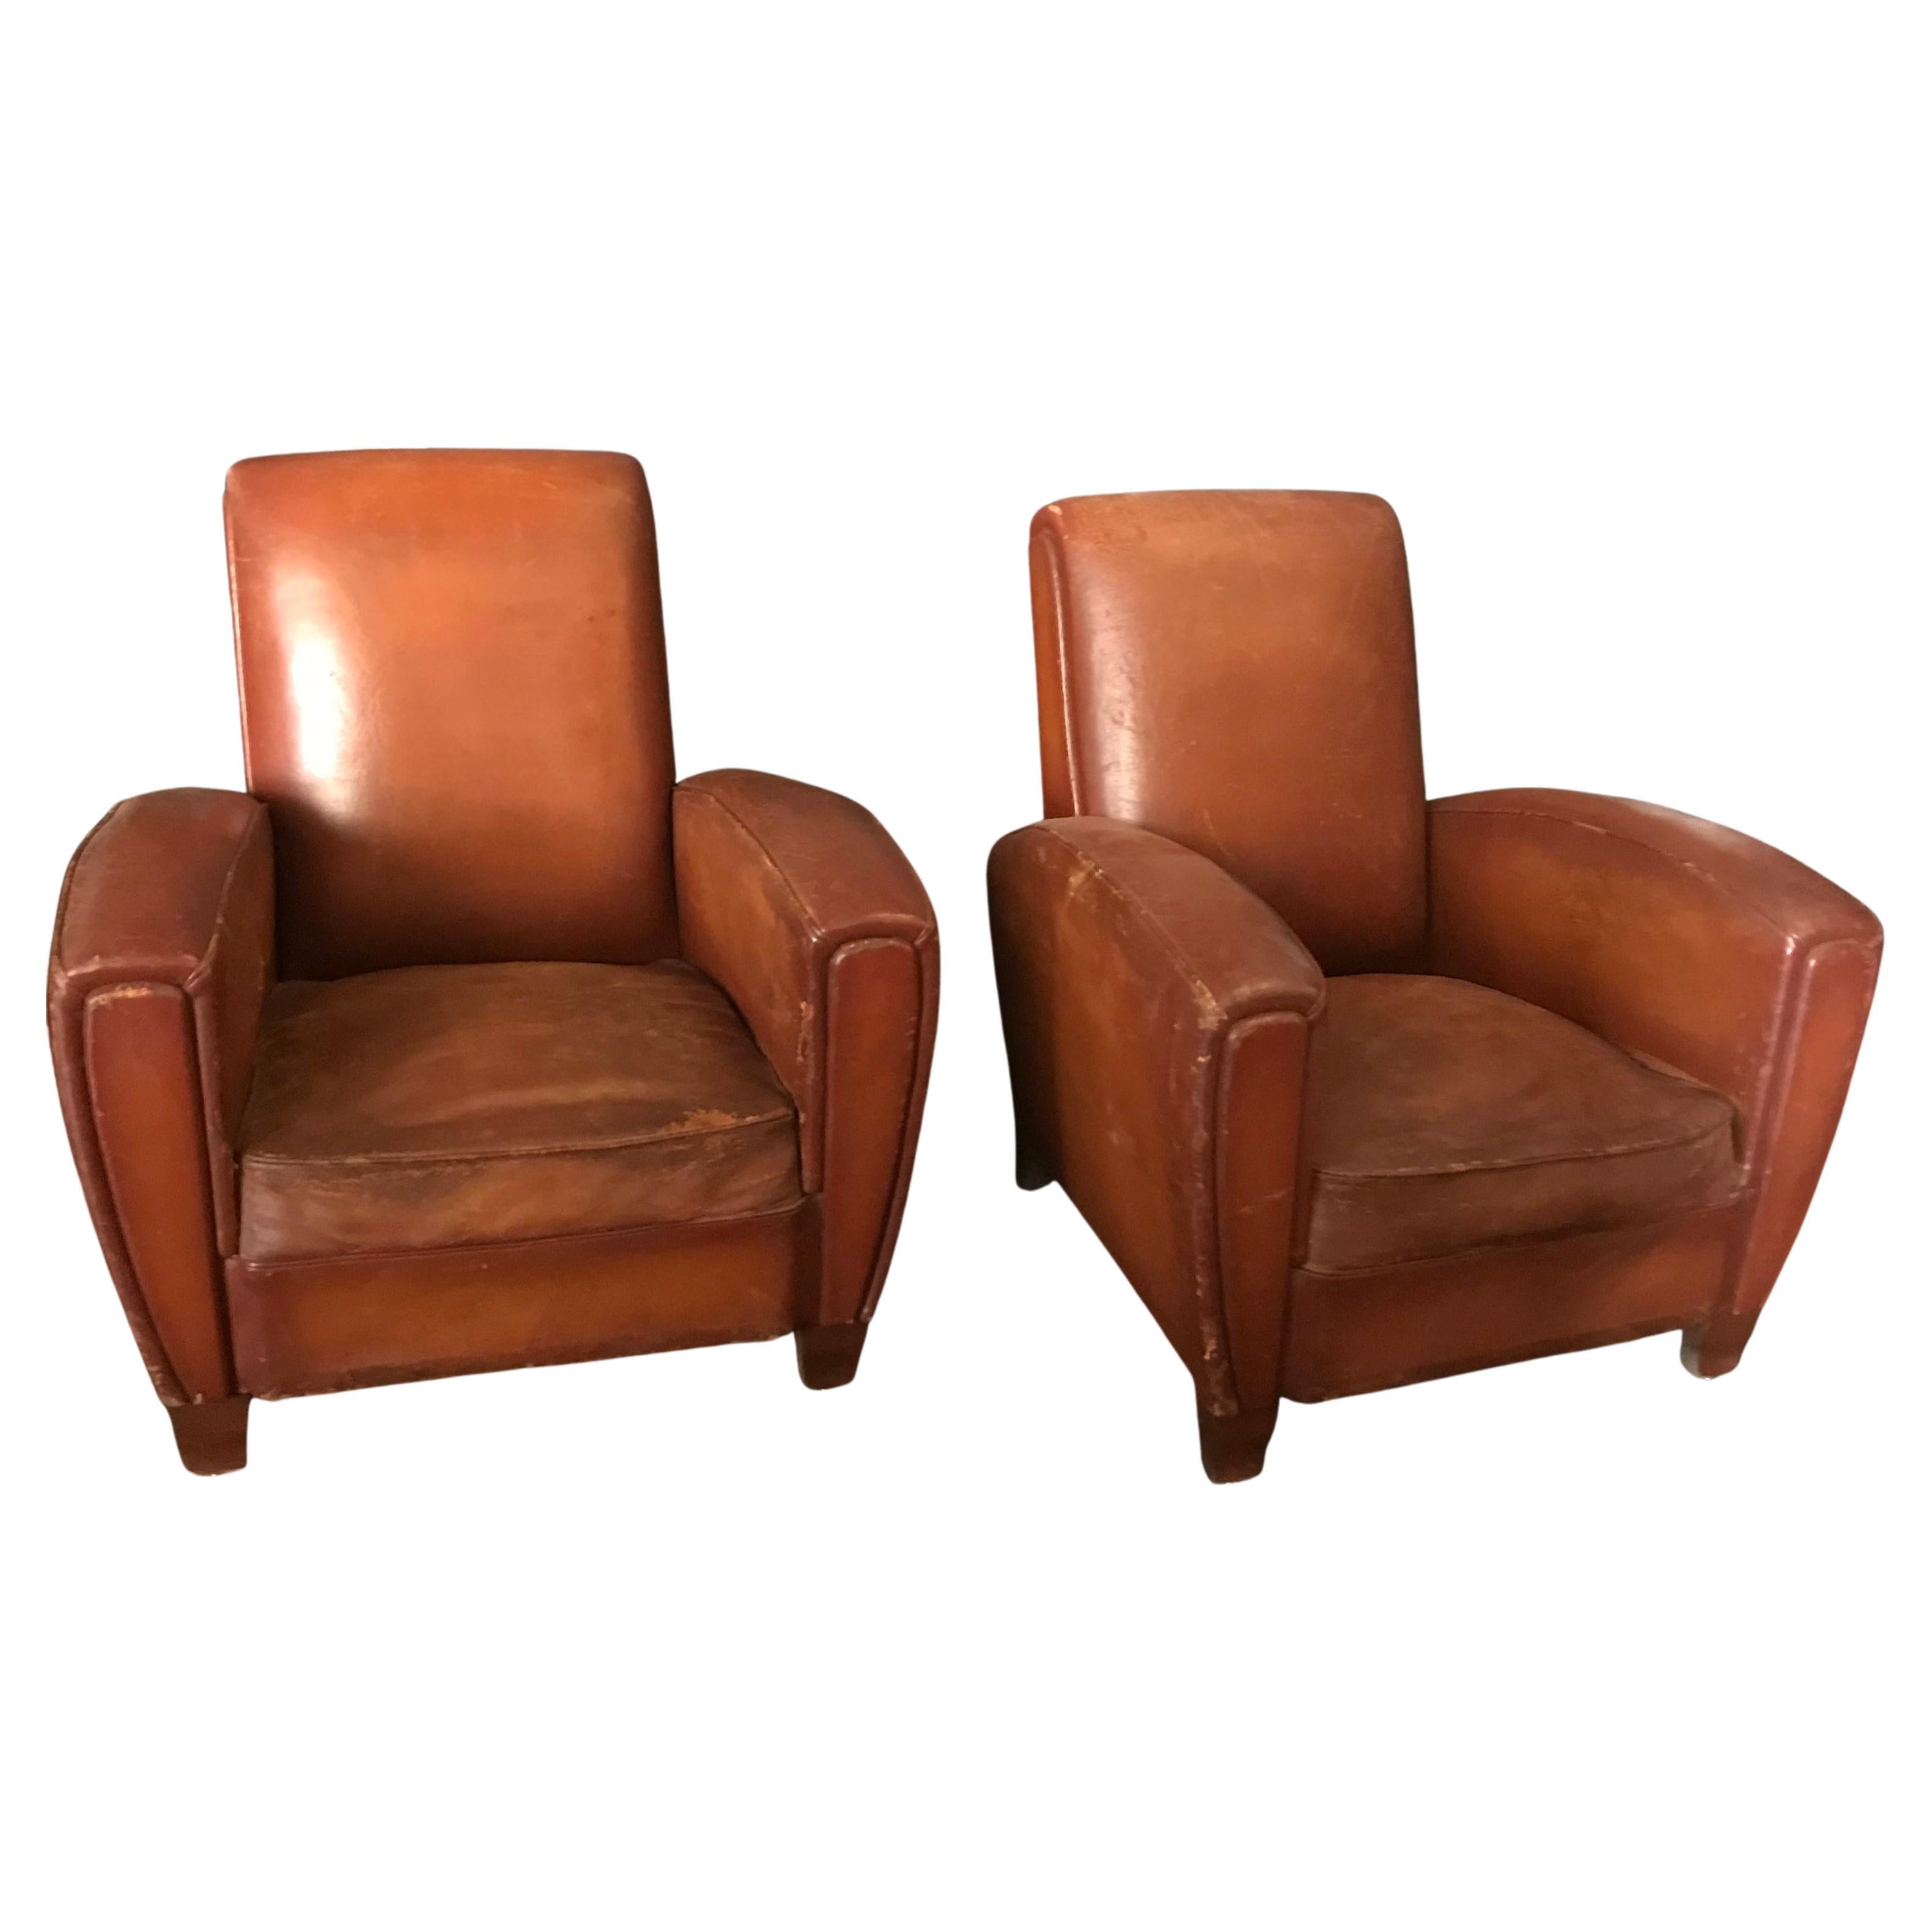 Pair of 1930’s French Cognac Leather Club Chairs